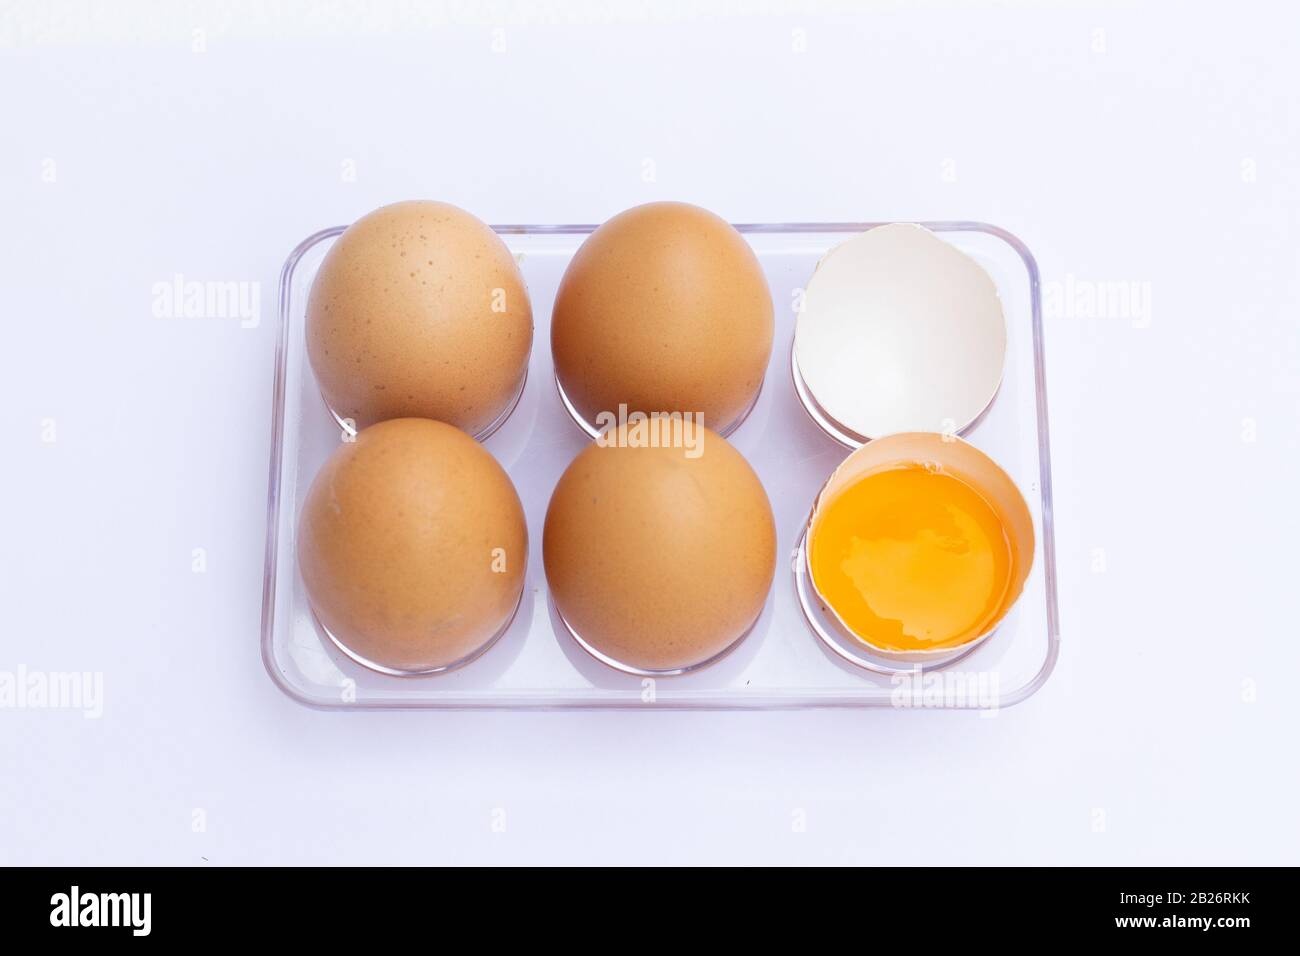 Four brown eggs lay on an egg tray with an eggshell on a white background. Stock Photo